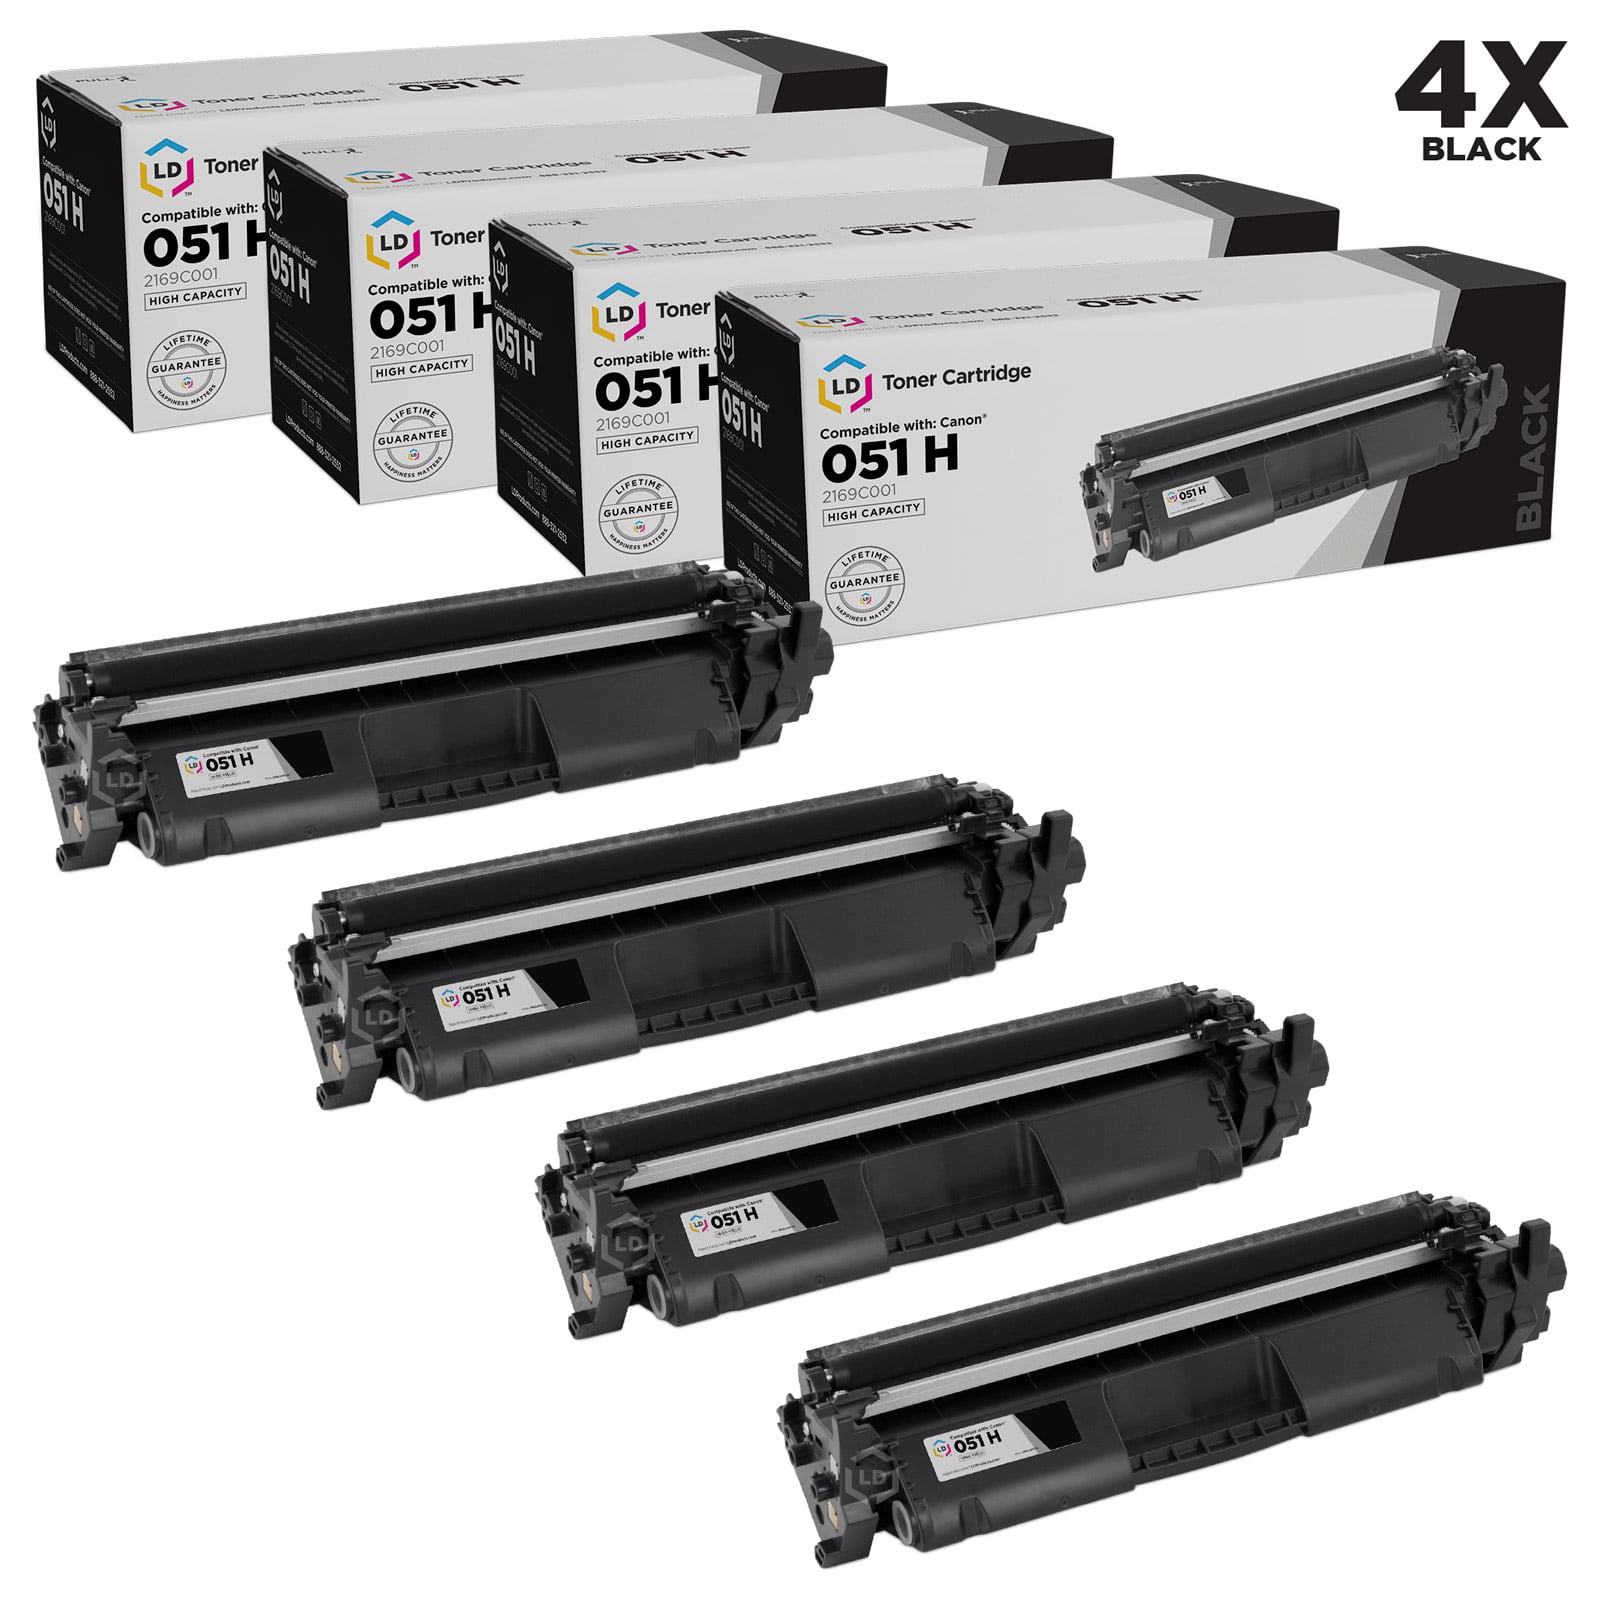 Black, 2-Pack LD Compatible Toner Cartridge Replacement for Canon 051H 2169C001 High Capacity